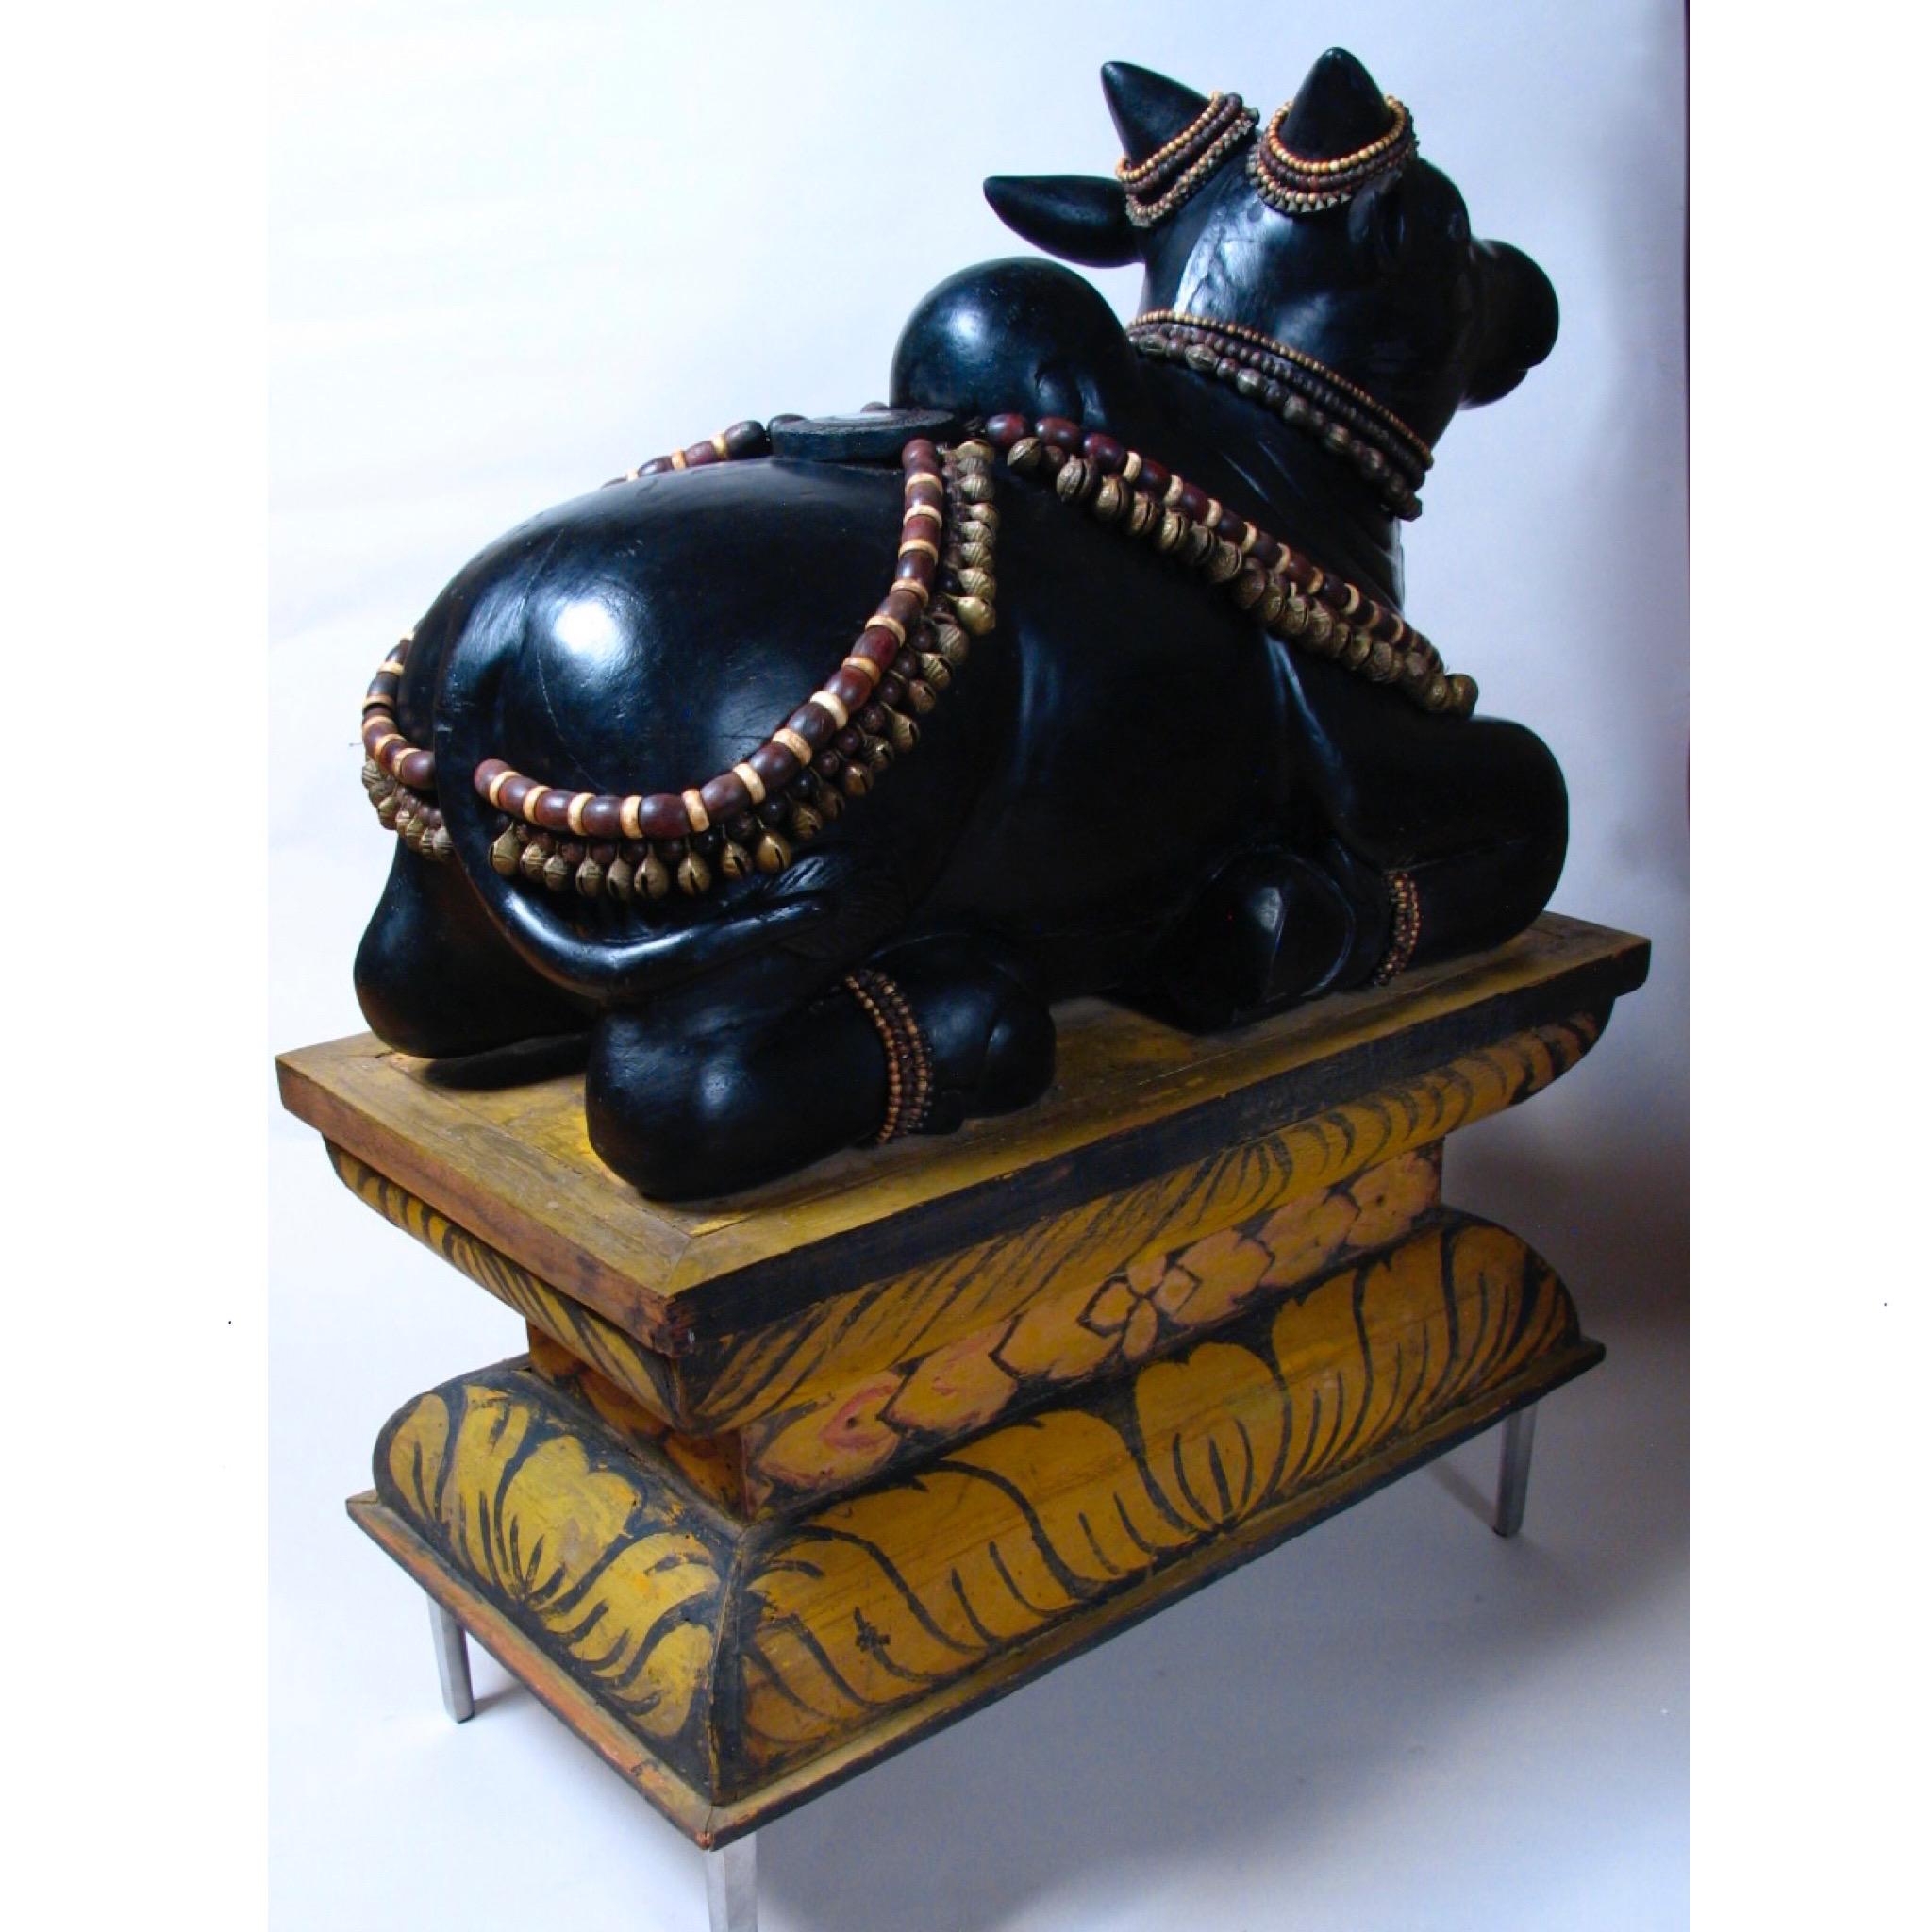 Carved Wood Sculpture of the Hindu Deity Nandi With Pedestal, Circa 1920 In Good Condition For Sale In Point Richmond, CA